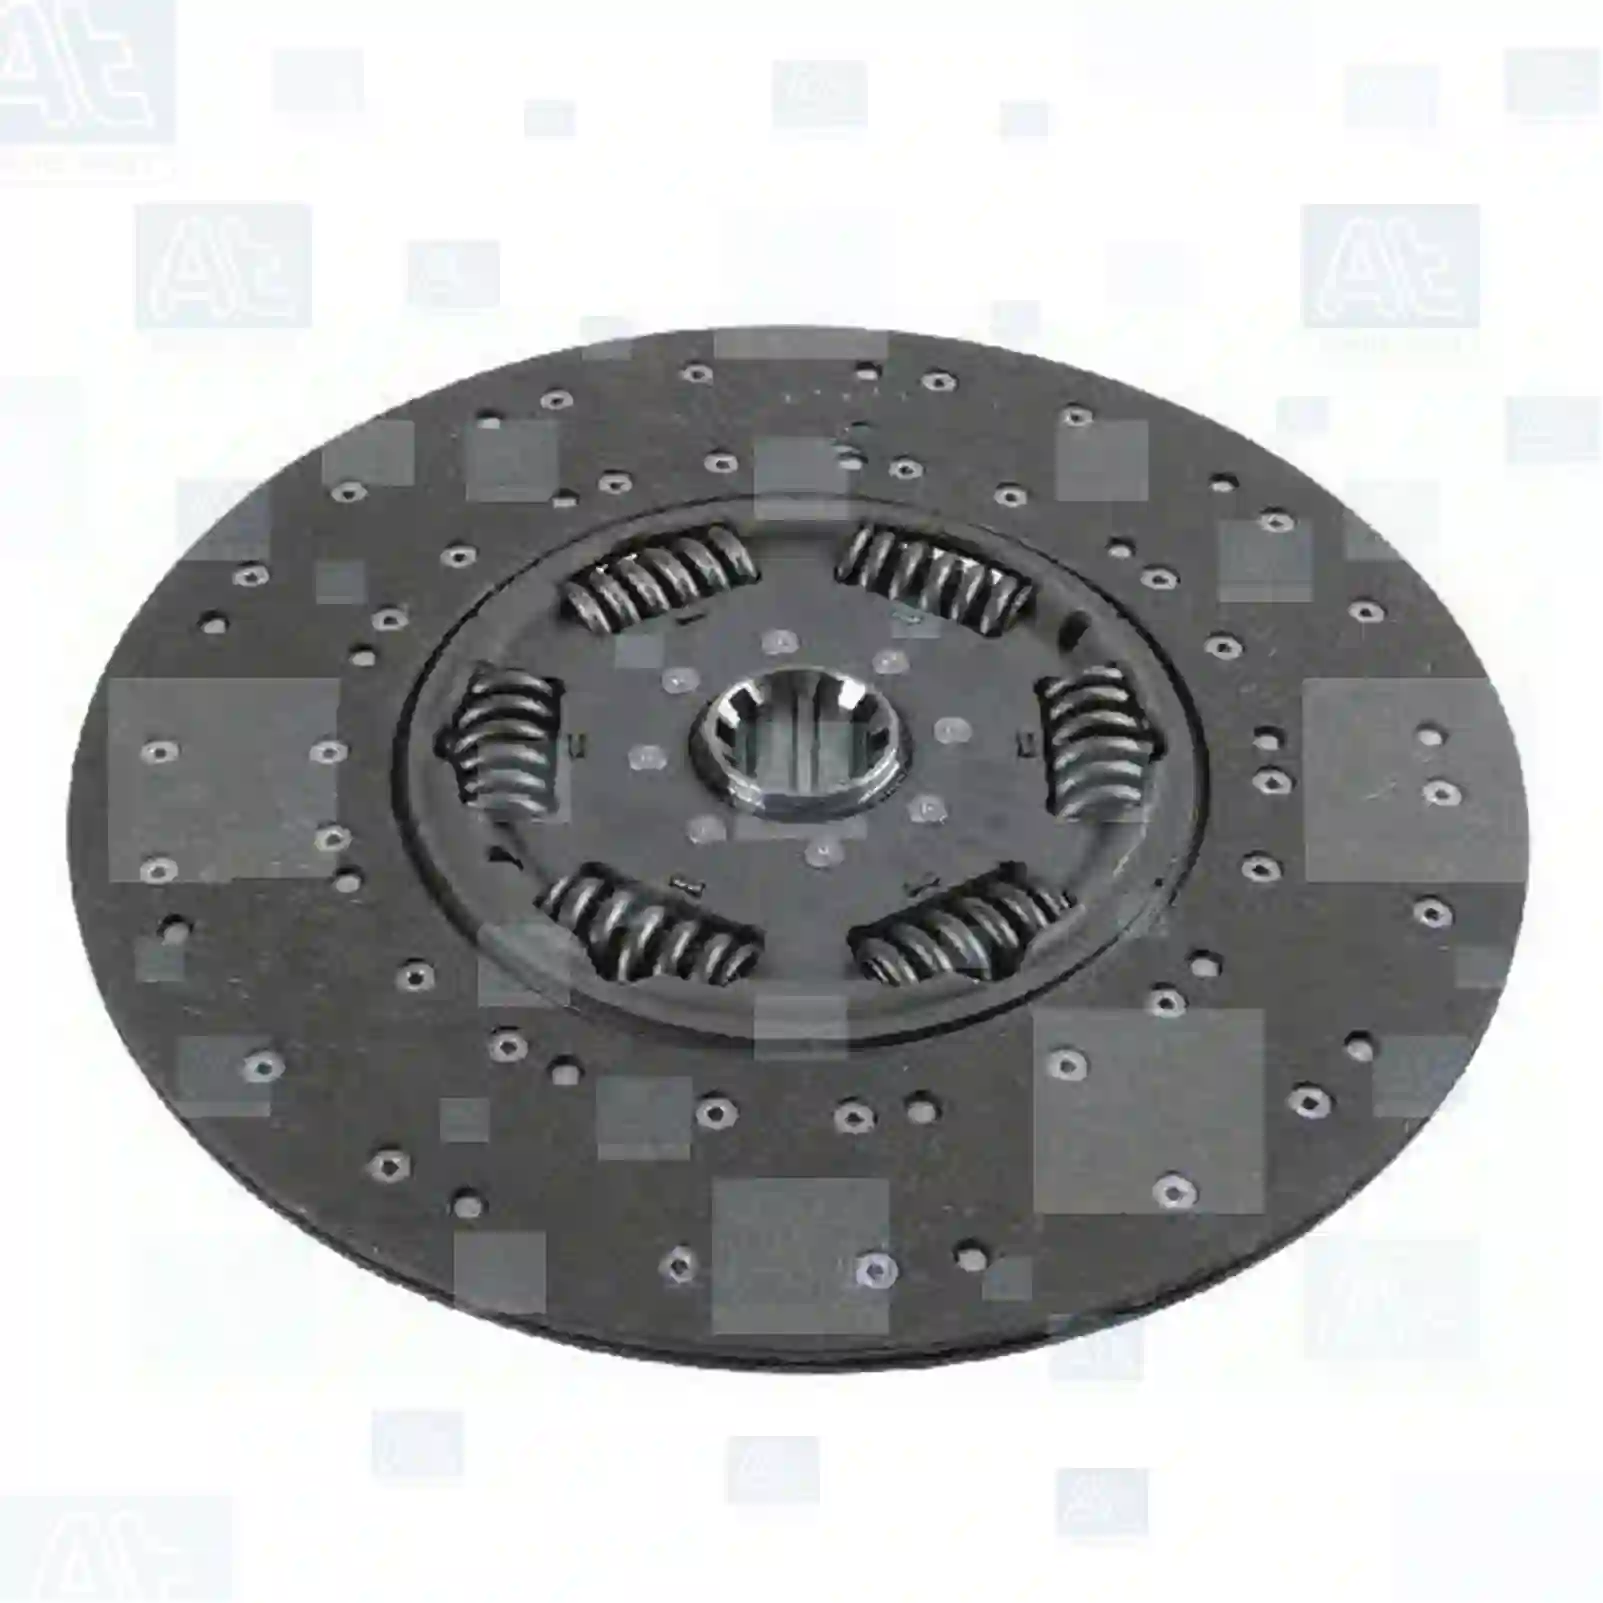 Clutch disc, at no 77721905, oem no: 193852, 1440715, 1450120, 1614294, 1689145, 1813472, 1813472A, 1813472R, 31250EOA80, 81303010352, 81303010460, 81303010476, 81303010485, 81303010496, 81303010503, 81303010506, 81303010507, 81303010511, 81303010533, 81303010534, 81303010545, 81303010546, 81303010547, 81303010548, 81303010549, 81303010559, 81303010567, 81303010570, 81303010572, 81303010620, 81303010623, 81303010626, 81303010677, 81303010679, 81303019496, 81303019506, 81303019549, 81303019623, 81303019677, 81303019679, 0072505803, 0072505903, 007250590380, 0092502103, 0092503103, 0112500603, 0122501403, 0122501503, 0122505303, 0132500803, 0132502003, 0132502103, 013250210380, 0132503003, 0132503903, 0152500203, 0152502303, 0152503803, 0162501703, 0162501803, 0162504303, 0162504403, 0172507803, 0182507803, 0182509303, 018250930380, 0192500803, 0192503303, 0192504503, 0192506803, 0202501603, 0202505103, 0202505403, 0202505703, 0202509003, 0222506103, 011009992, 011079828, 0182509903, 8383286000, 10996020, 10996025, 11442962 At Spare Part | Engine, Accelerator Pedal, Camshaft, Connecting Rod, Crankcase, Crankshaft, Cylinder Head, Engine Suspension Mountings, Exhaust Manifold, Exhaust Gas Recirculation, Filter Kits, Flywheel Housing, General Overhaul Kits, Engine, Intake Manifold, Oil Cleaner, Oil Cooler, Oil Filter, Oil Pump, Oil Sump, Piston & Liner, Sensor & Switch, Timing Case, Turbocharger, Cooling System, Belt Tensioner, Coolant Filter, Coolant Pipe, Corrosion Prevention Agent, Drive, Expansion Tank, Fan, Intercooler, Monitors & Gauges, Radiator, Thermostat, V-Belt / Timing belt, Water Pump, Fuel System, Electronical Injector Unit, Feed Pump, Fuel Filter, cpl., Fuel Gauge Sender,  Fuel Line, Fuel Pump, Fuel Tank, Injection Line Kit, Injection Pump, Exhaust System, Clutch & Pedal, Gearbox, Propeller Shaft, Axles, Brake System, Hubs & Wheels, Suspension, Leaf Spring, Universal Parts / Accessories, Steering, Electrical System, Cabin Clutch disc, at no 77721905, oem no: 193852, 1440715, 1450120, 1614294, 1689145, 1813472, 1813472A, 1813472R, 31250EOA80, 81303010352, 81303010460, 81303010476, 81303010485, 81303010496, 81303010503, 81303010506, 81303010507, 81303010511, 81303010533, 81303010534, 81303010545, 81303010546, 81303010547, 81303010548, 81303010549, 81303010559, 81303010567, 81303010570, 81303010572, 81303010620, 81303010623, 81303010626, 81303010677, 81303010679, 81303019496, 81303019506, 81303019549, 81303019623, 81303019677, 81303019679, 0072505803, 0072505903, 007250590380, 0092502103, 0092503103, 0112500603, 0122501403, 0122501503, 0122505303, 0132500803, 0132502003, 0132502103, 013250210380, 0132503003, 0132503903, 0152500203, 0152502303, 0152503803, 0162501703, 0162501803, 0162504303, 0162504403, 0172507803, 0182507803, 0182509303, 018250930380, 0192500803, 0192503303, 0192504503, 0192506803, 0202501603, 0202505103, 0202505403, 0202505703, 0202509003, 0222506103, 011009992, 011079828, 0182509903, 8383286000, 10996020, 10996025, 11442962 At Spare Part | Engine, Accelerator Pedal, Camshaft, Connecting Rod, Crankcase, Crankshaft, Cylinder Head, Engine Suspension Mountings, Exhaust Manifold, Exhaust Gas Recirculation, Filter Kits, Flywheel Housing, General Overhaul Kits, Engine, Intake Manifold, Oil Cleaner, Oil Cooler, Oil Filter, Oil Pump, Oil Sump, Piston & Liner, Sensor & Switch, Timing Case, Turbocharger, Cooling System, Belt Tensioner, Coolant Filter, Coolant Pipe, Corrosion Prevention Agent, Drive, Expansion Tank, Fan, Intercooler, Monitors & Gauges, Radiator, Thermostat, V-Belt / Timing belt, Water Pump, Fuel System, Electronical Injector Unit, Feed Pump, Fuel Filter, cpl., Fuel Gauge Sender,  Fuel Line, Fuel Pump, Fuel Tank, Injection Line Kit, Injection Pump, Exhaust System, Clutch & Pedal, Gearbox, Propeller Shaft, Axles, Brake System, Hubs & Wheels, Suspension, Leaf Spring, Universal Parts / Accessories, Steering, Electrical System, Cabin